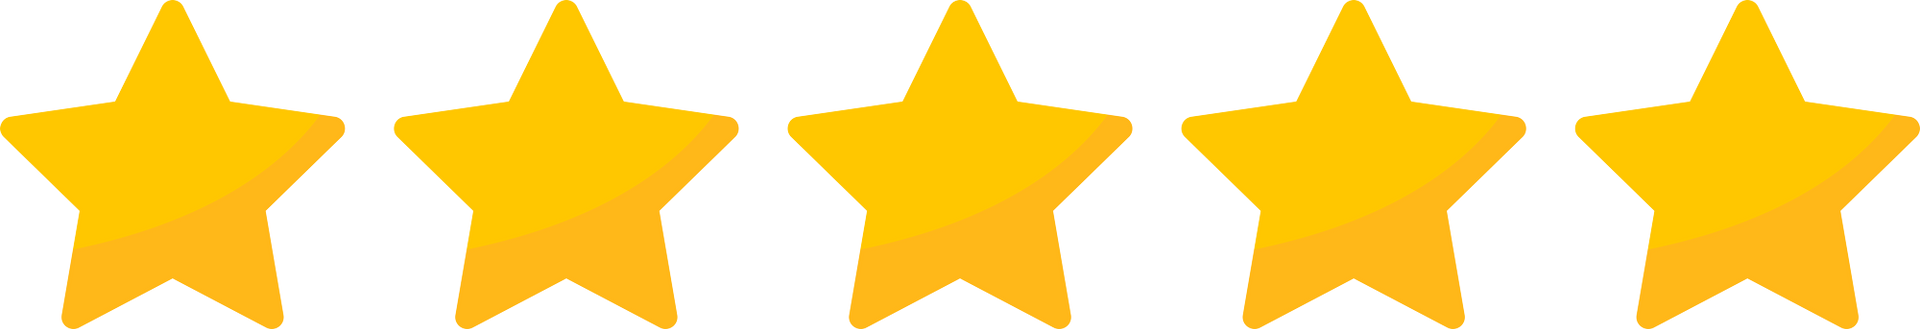 five yellow stars are arranged in a row on a white background